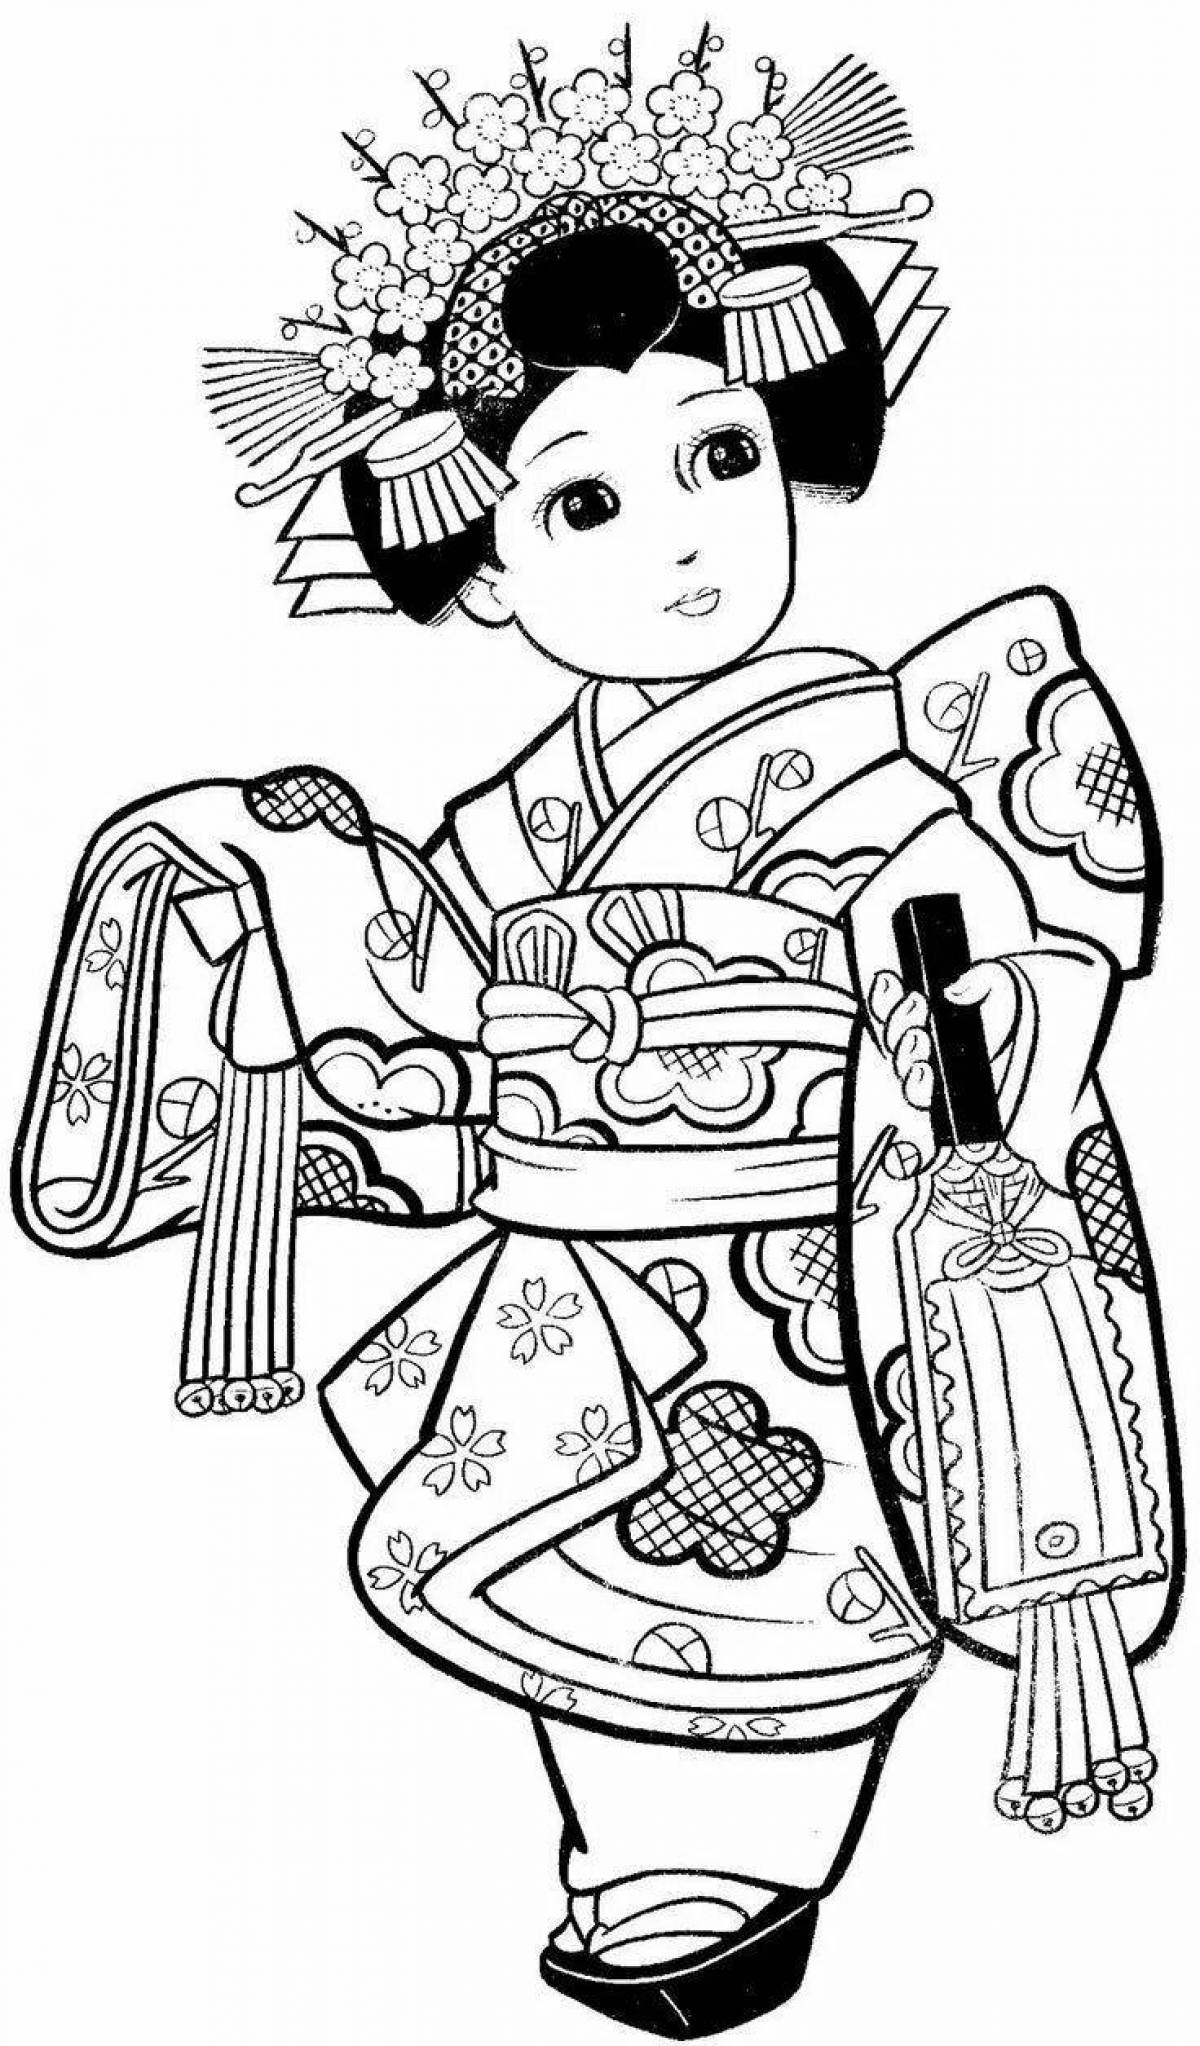 Exquisite Chinese coloring book for kids